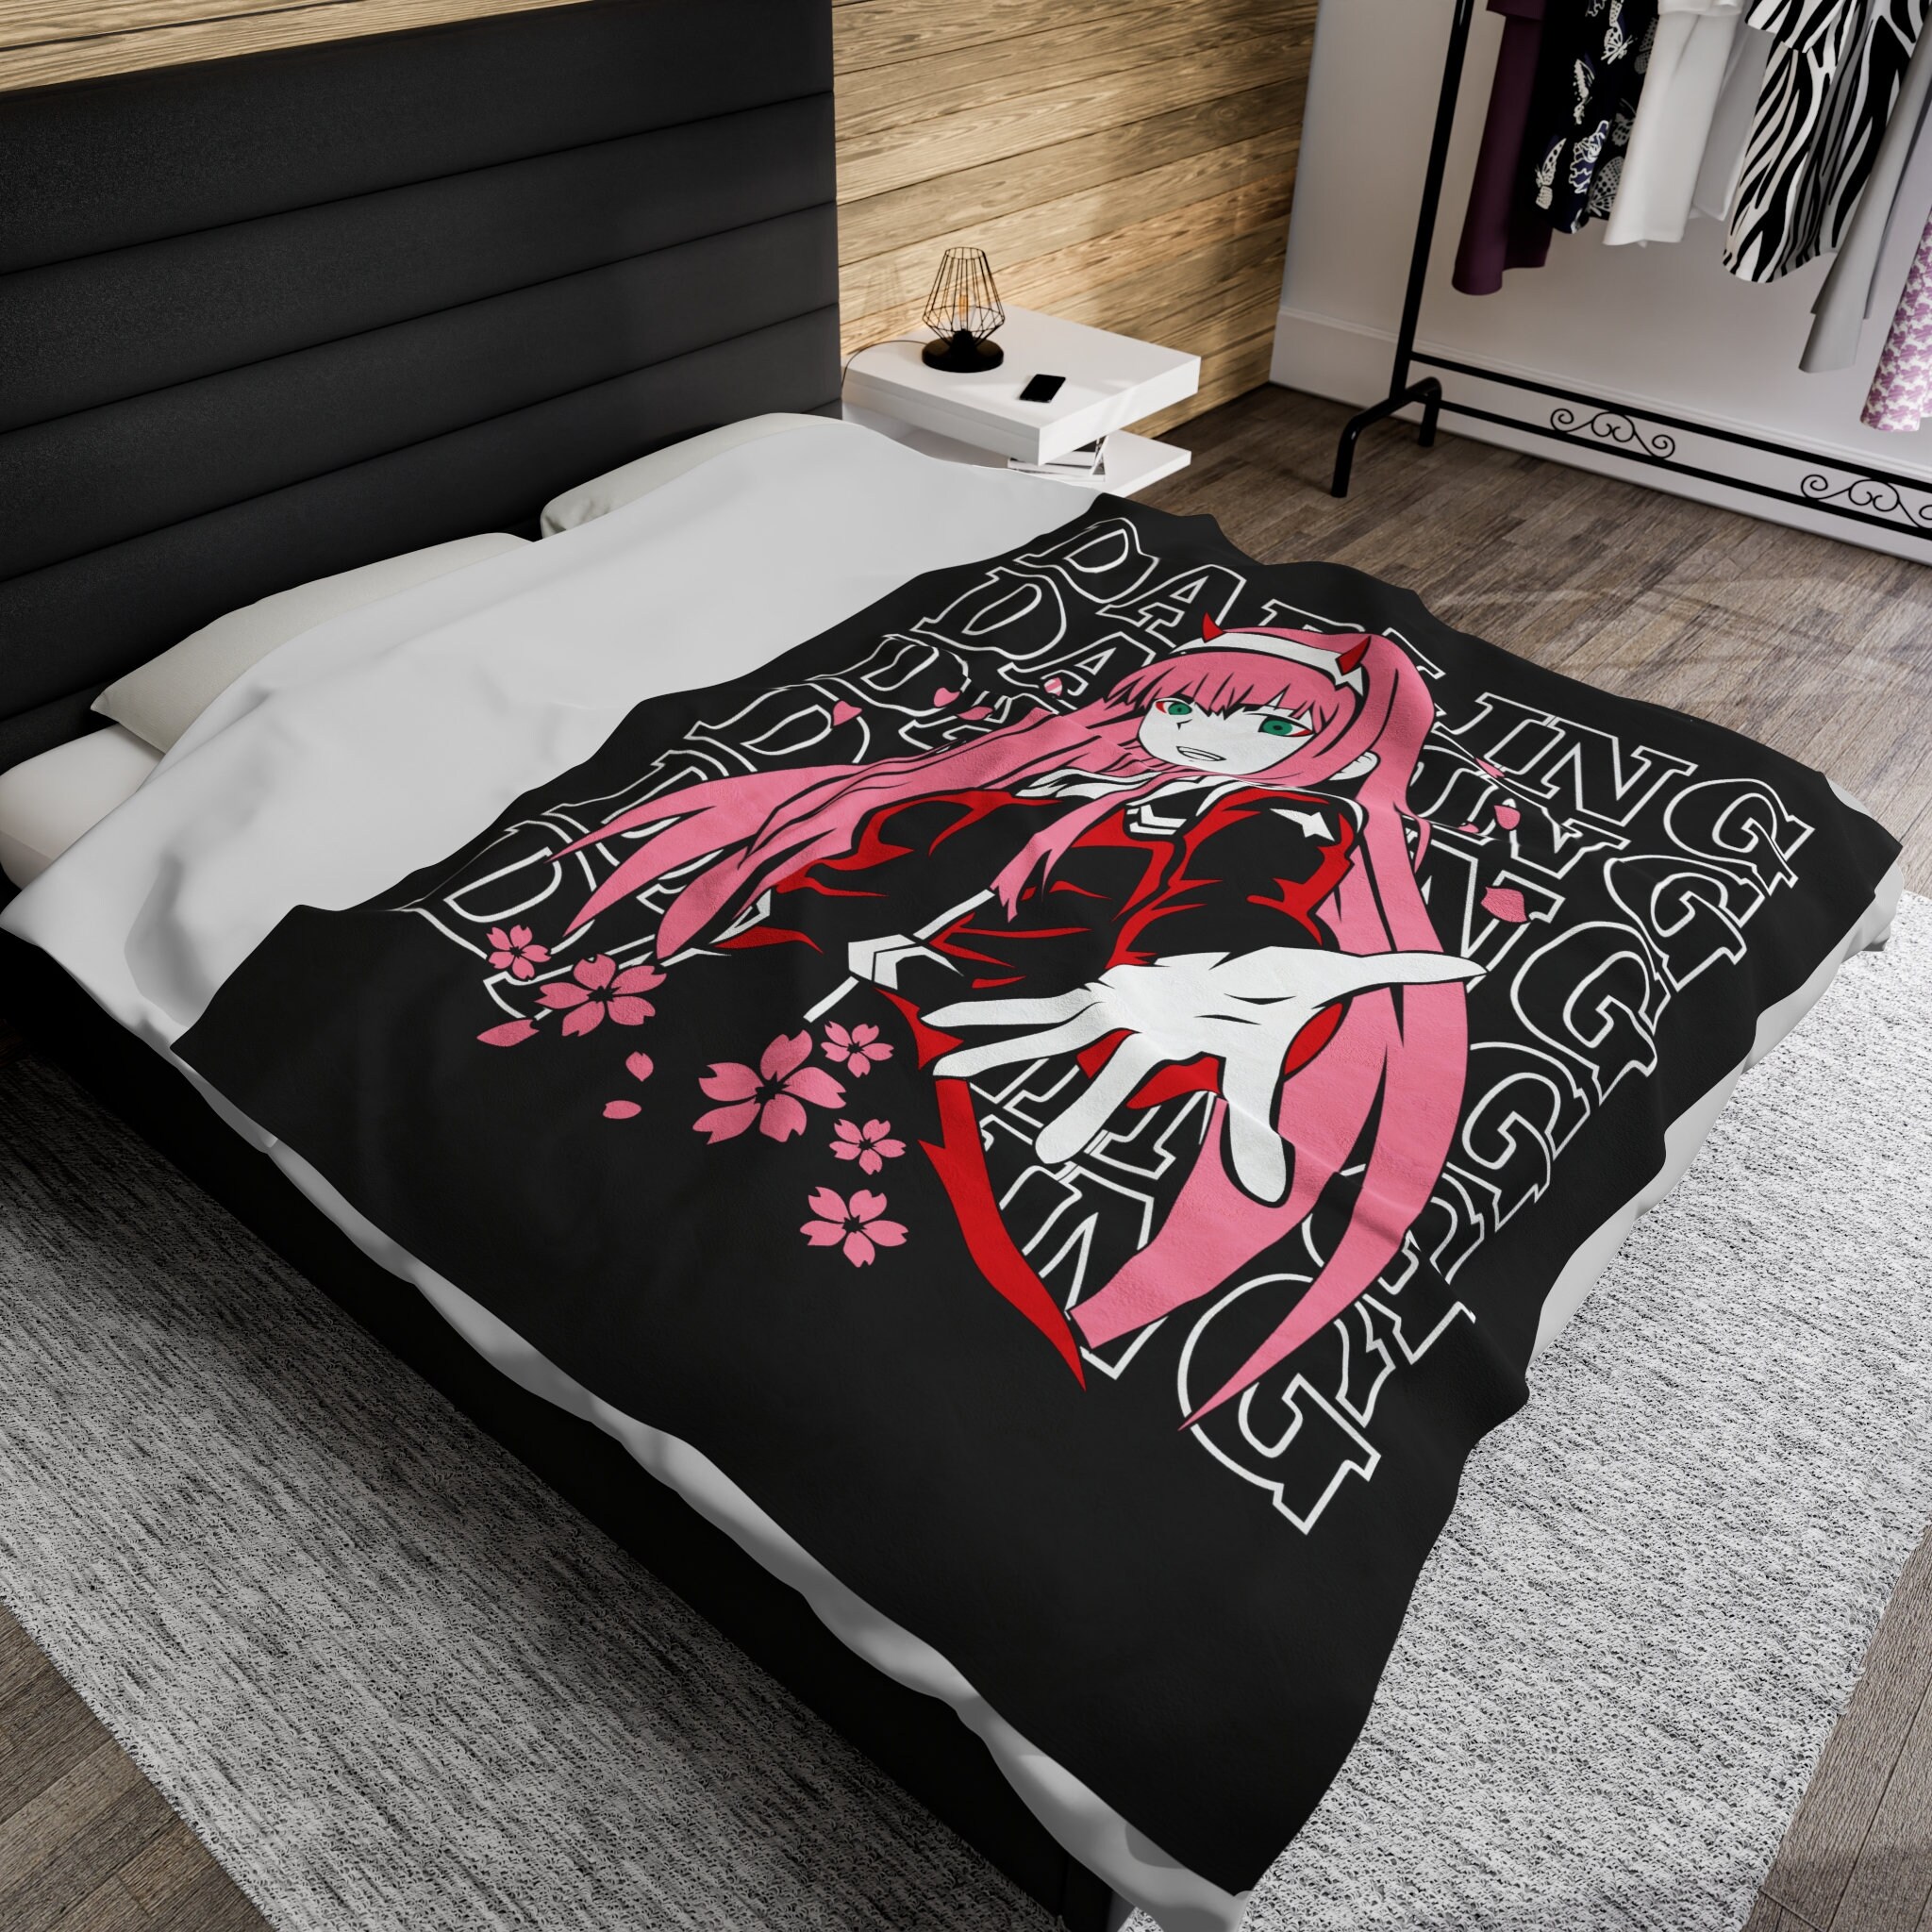  FUNKY STORE Darling in The Franxx Waifu Plush Doll Toy Pillow  Cushion One pcs (Zero Two) 38x40 cm : Toys & Games